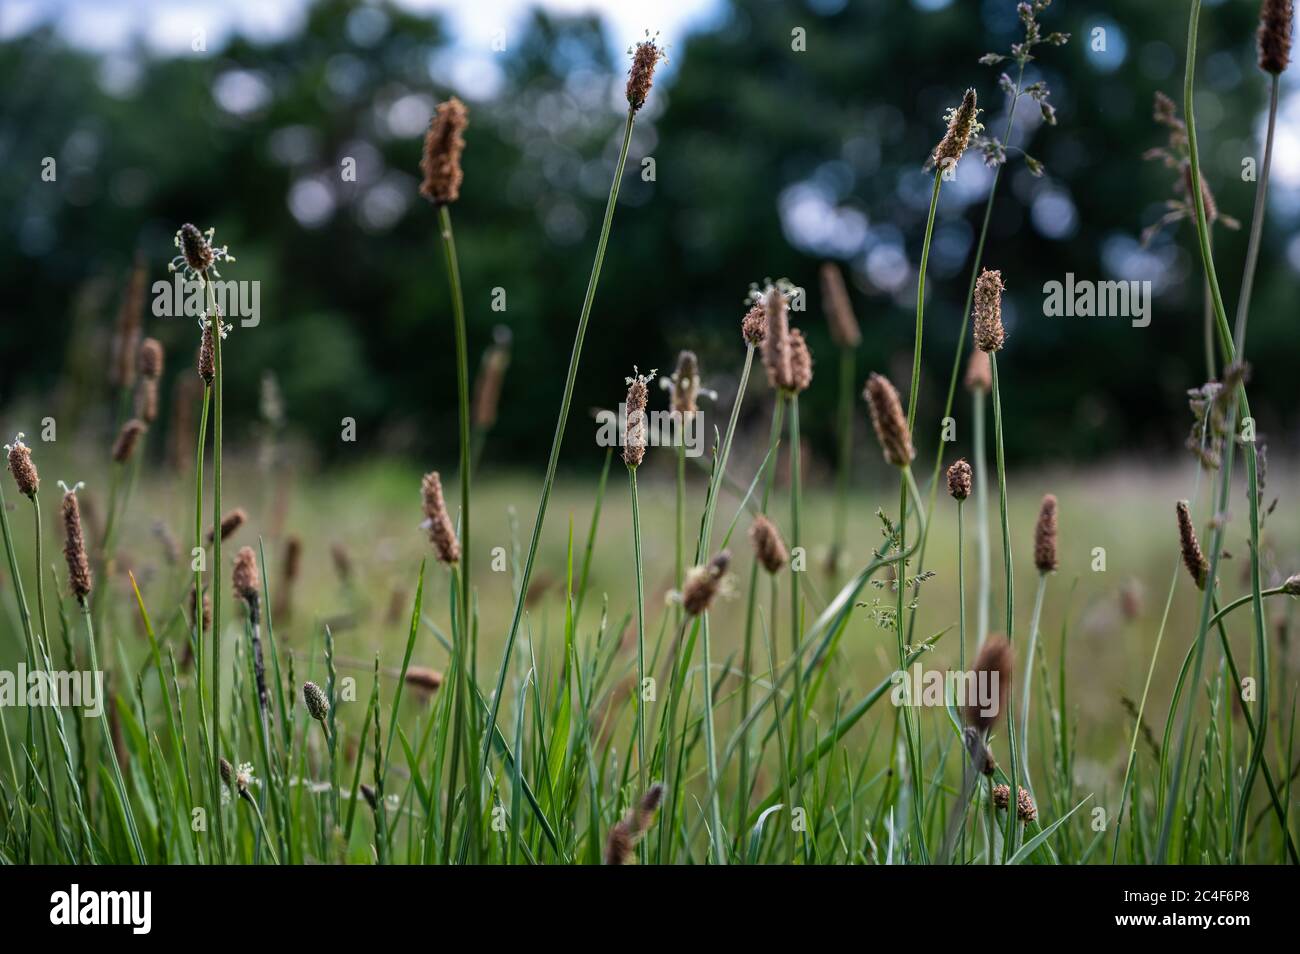 Selective focus of eleocharis palustris in a field under the sunlight with a blurry background Stock Photo